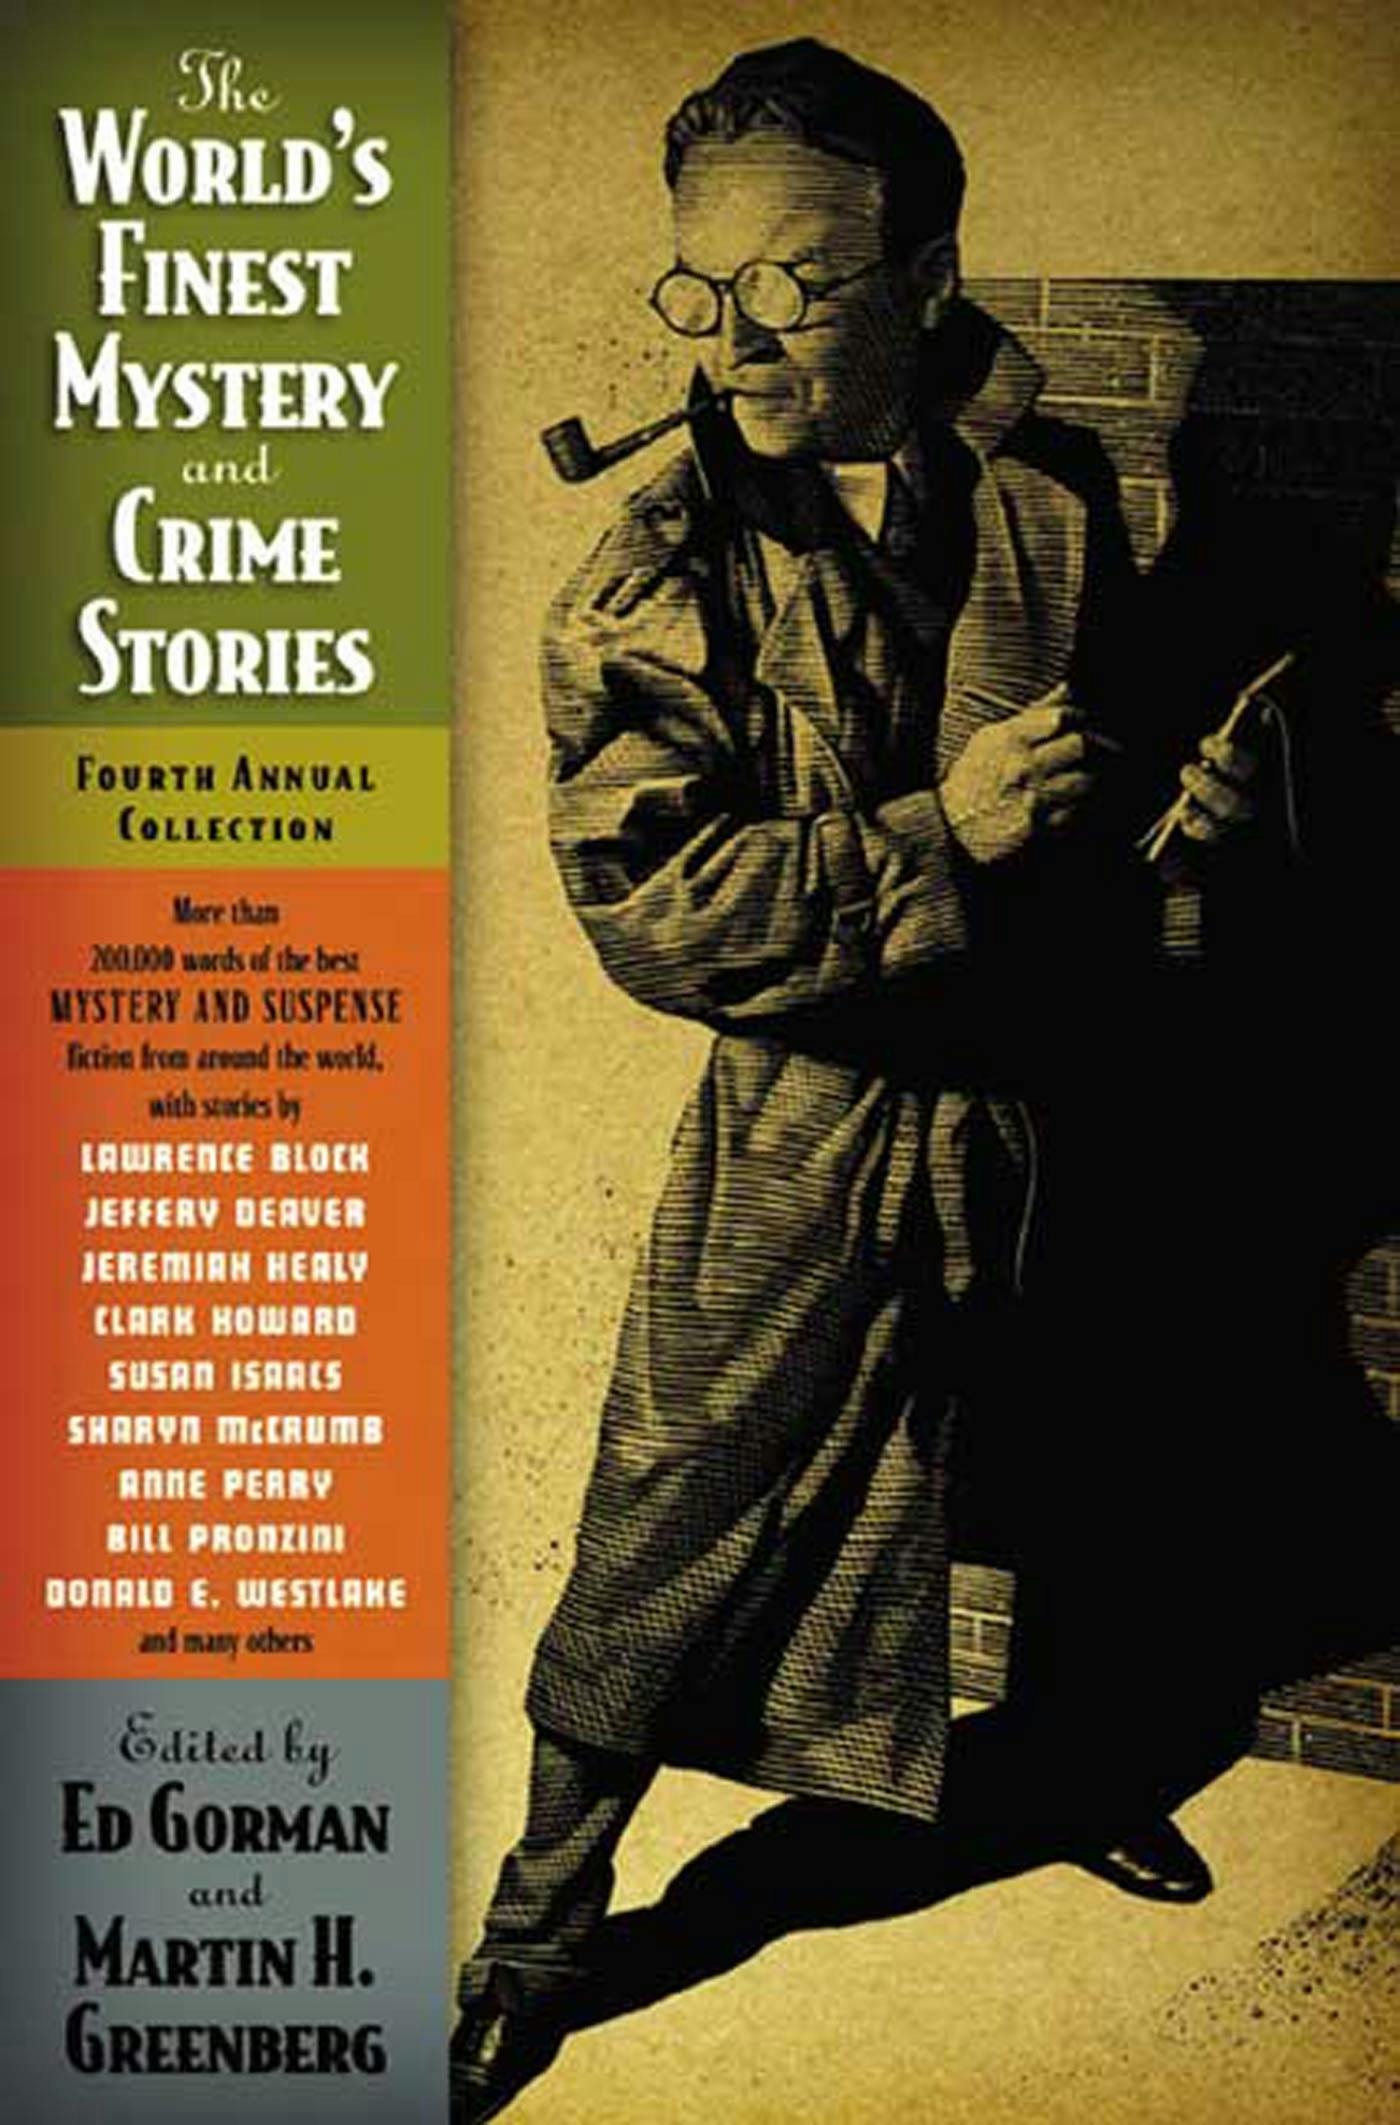 Cover for the book titled as: The World's Finest Mystery and Crime Stories: 4